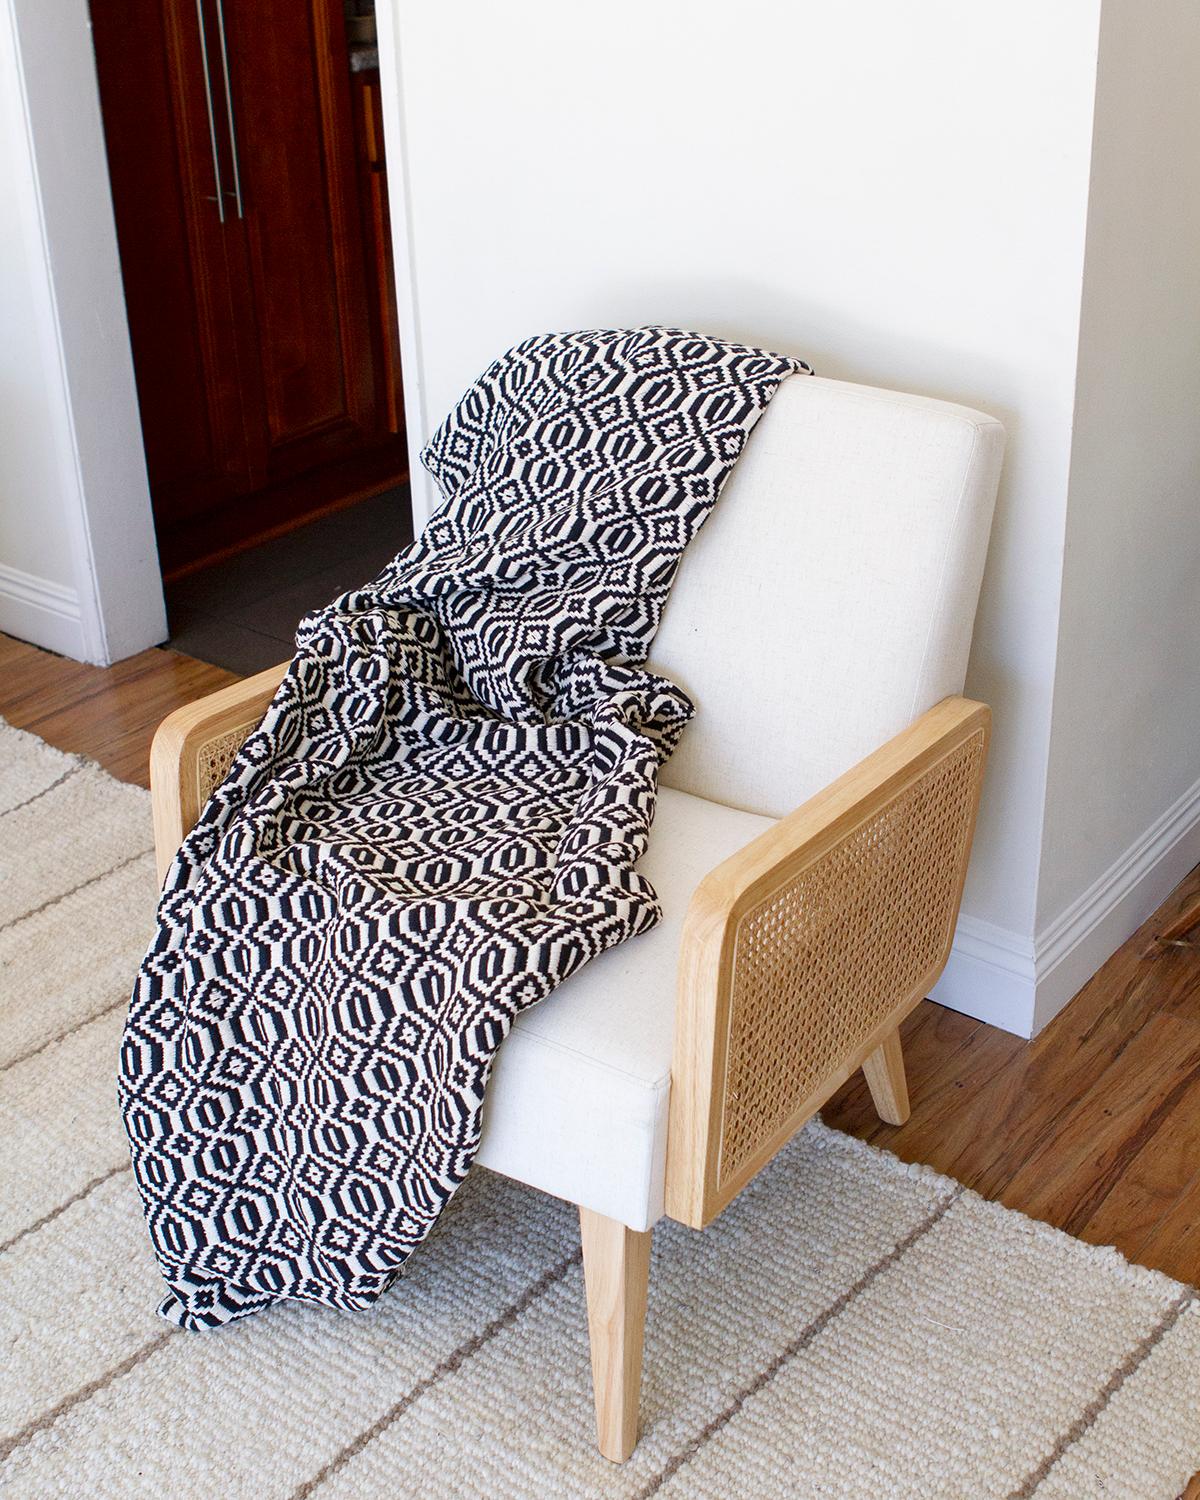 This hand made artisanal throw is made by hand in Southern Portugal. The striking geometric pattern is the perfect graphic addition to any living room. A bold statement while also being timeless. This home decoration blanket goes great with solid